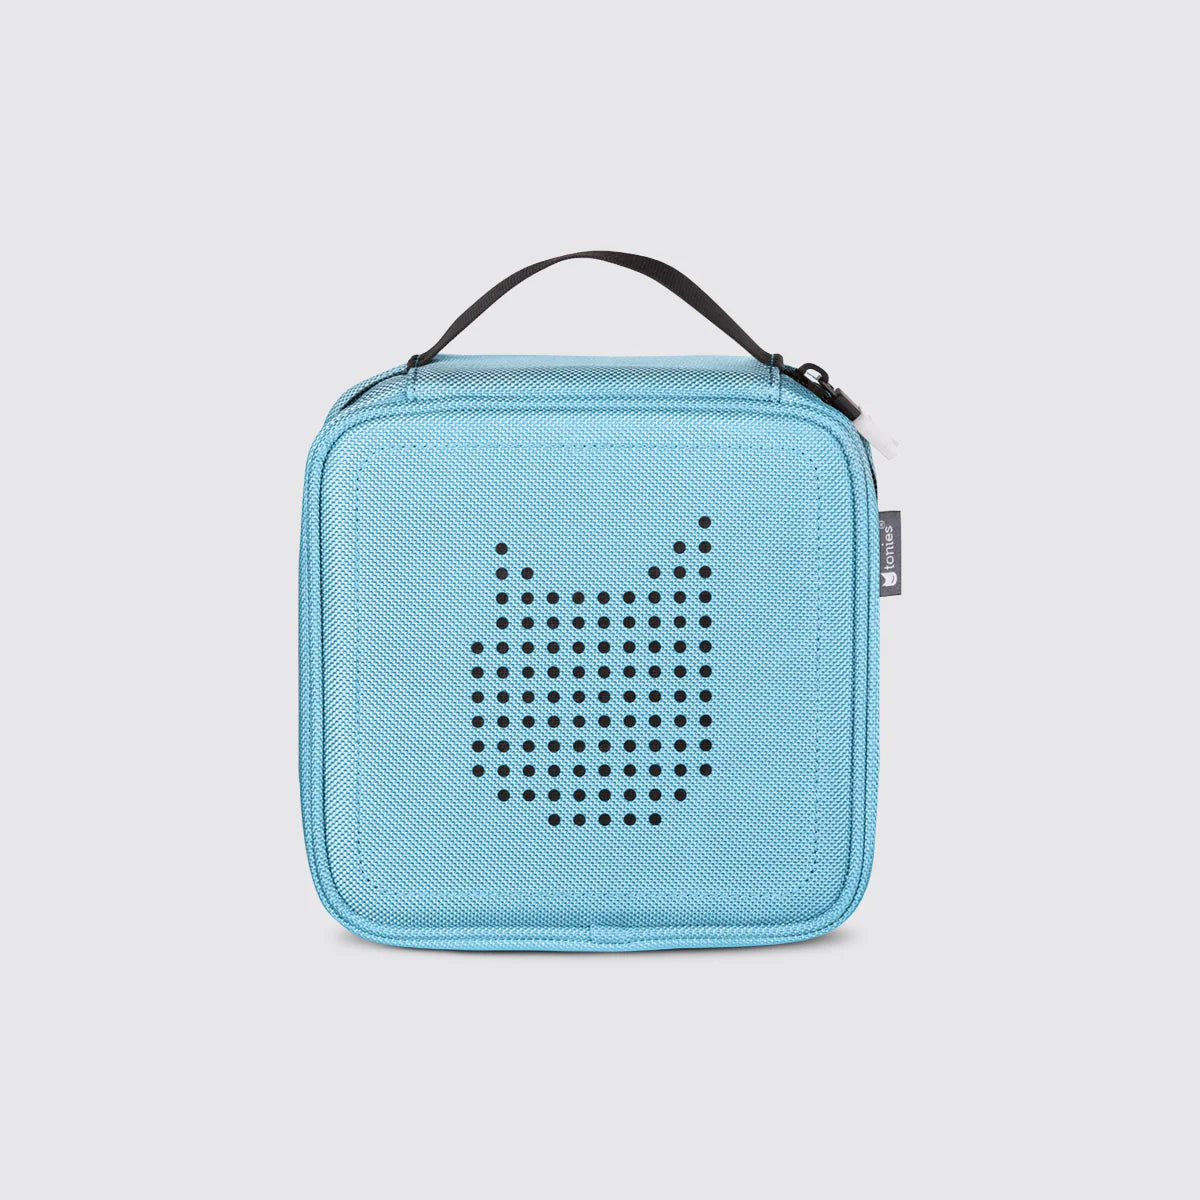 Tonie Carrying Case- Light Blue by Tonies #10001202